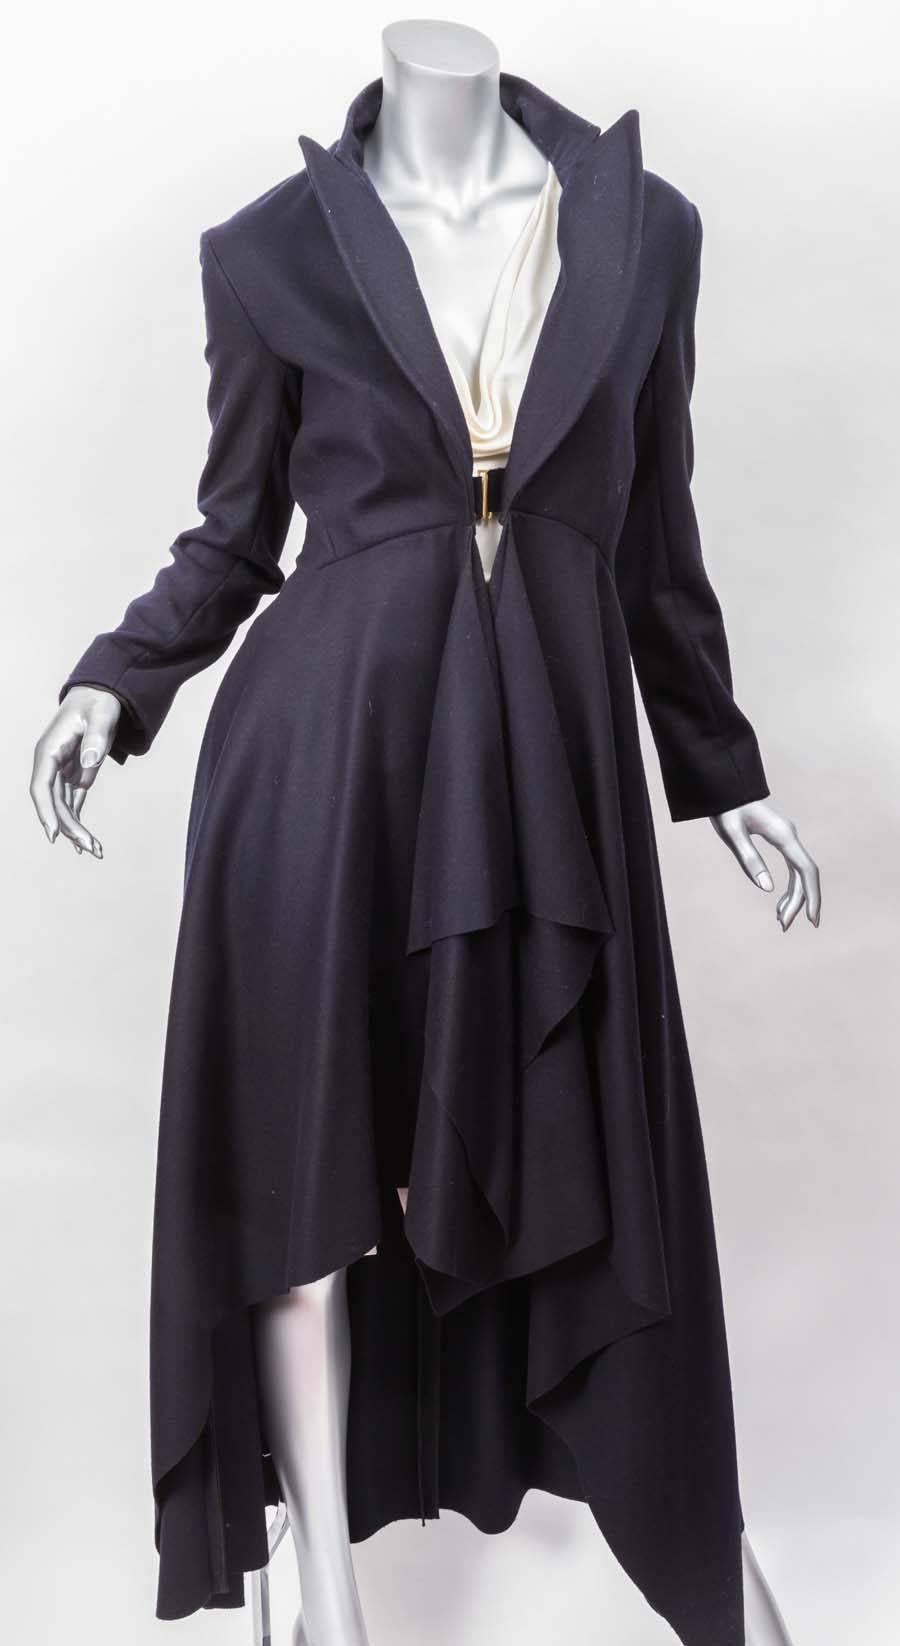 Stunning Celine Navy Blue Long Draped Wool Coat with cascading high low hem and front hook closure. Lined partially in silk. Side pockets and inverted pleat back.
New with original tags.